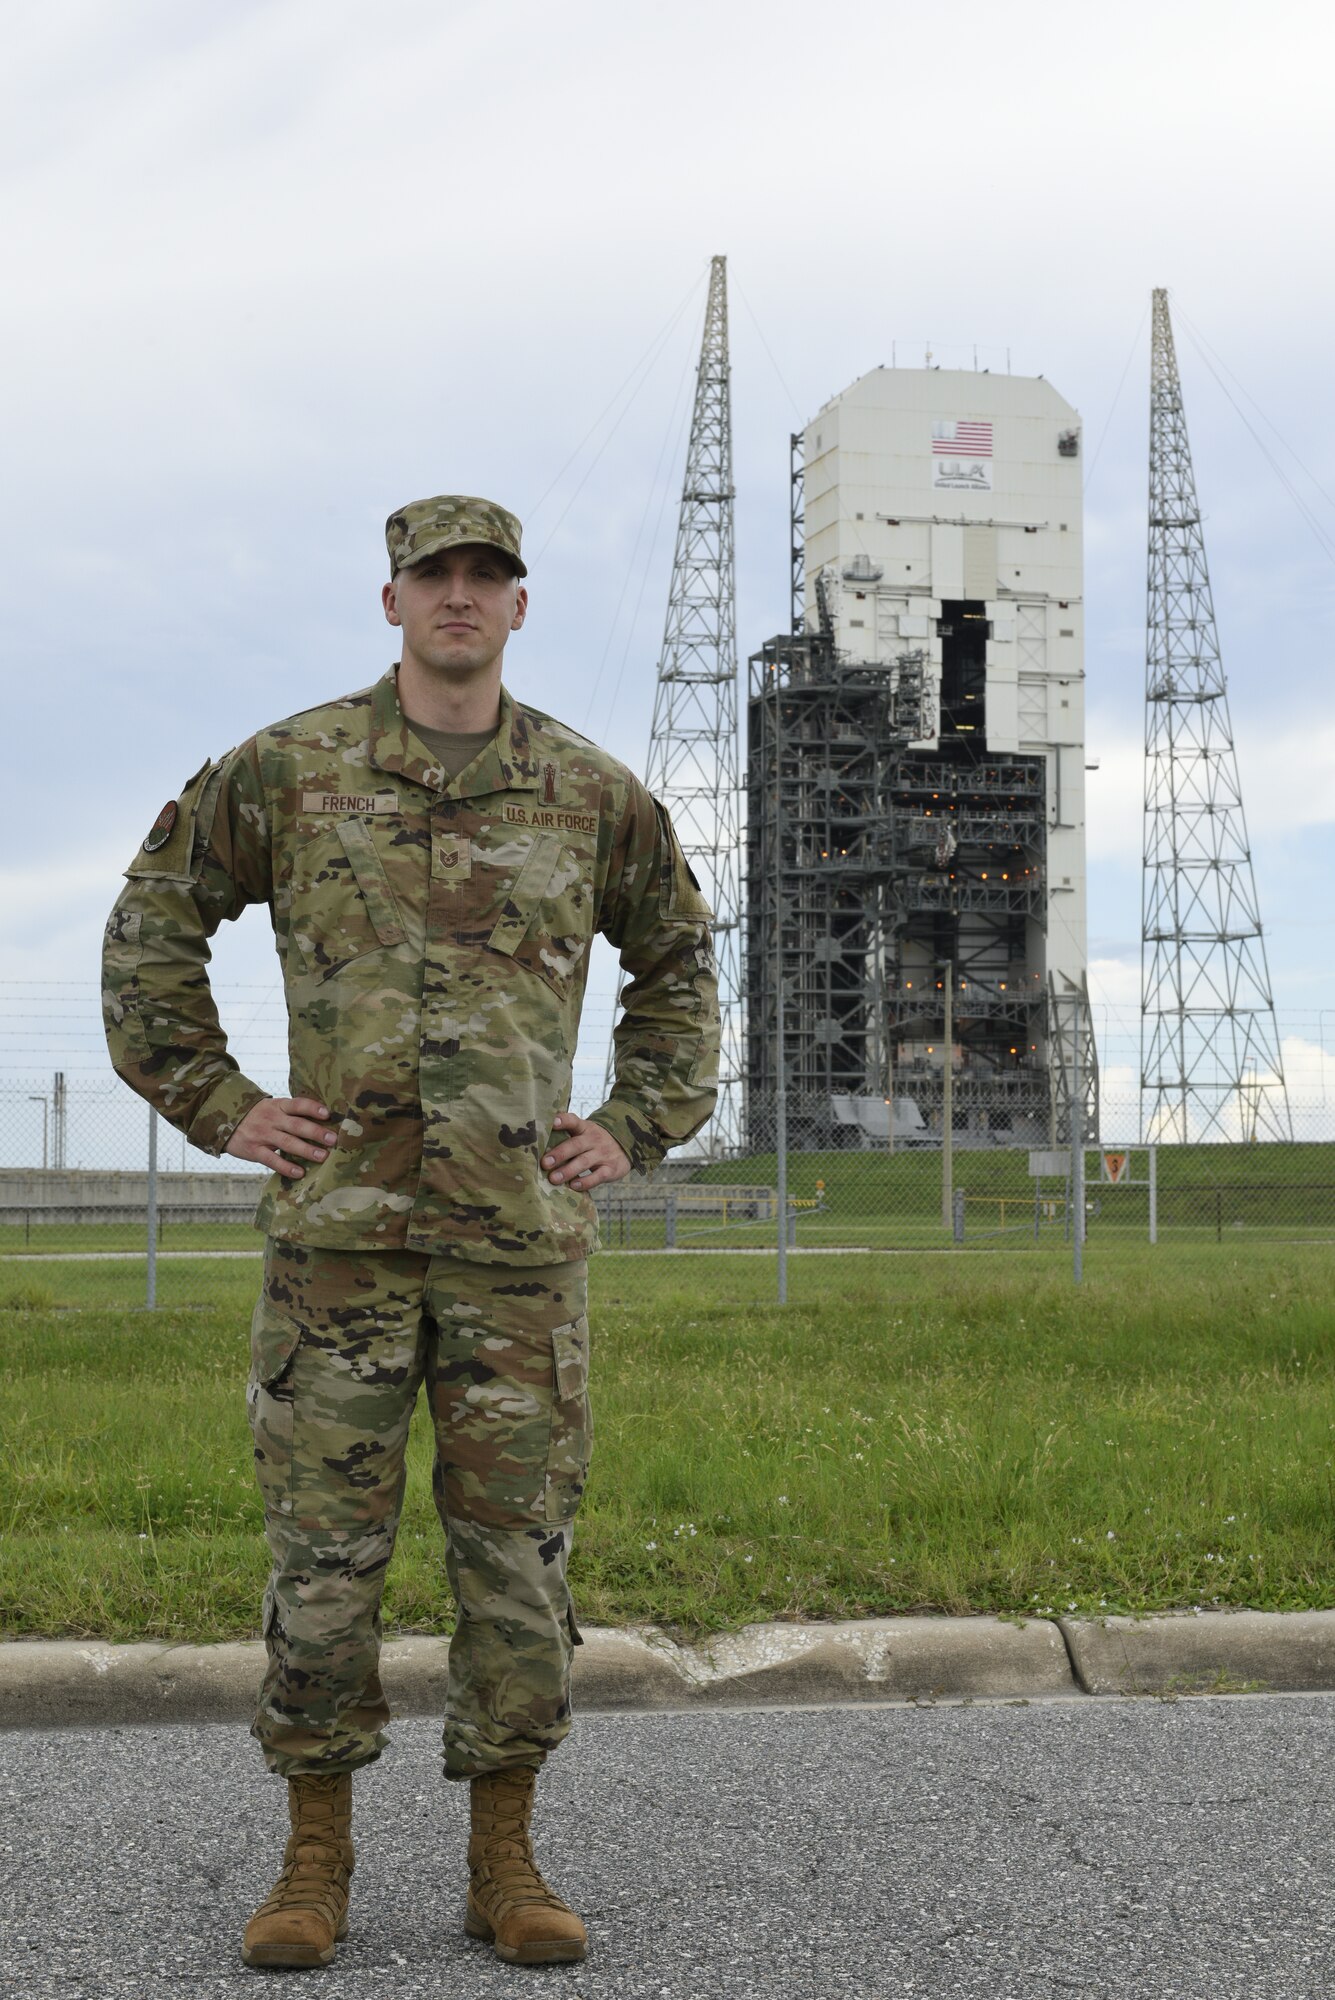 Tech. Sgt. Christopher French, 5th Space Launch Squadron mission assurance instructor stands in front of a space launch complex Aug. 9, 2021, at Cape Canaveral Space Force Station, Florida. French won the Space Operations Command Space Launch Maintainer of the Year award in the noncommissioned officer category. (U.S. Space Force photo by Airman 1st Class Samuel Becker)